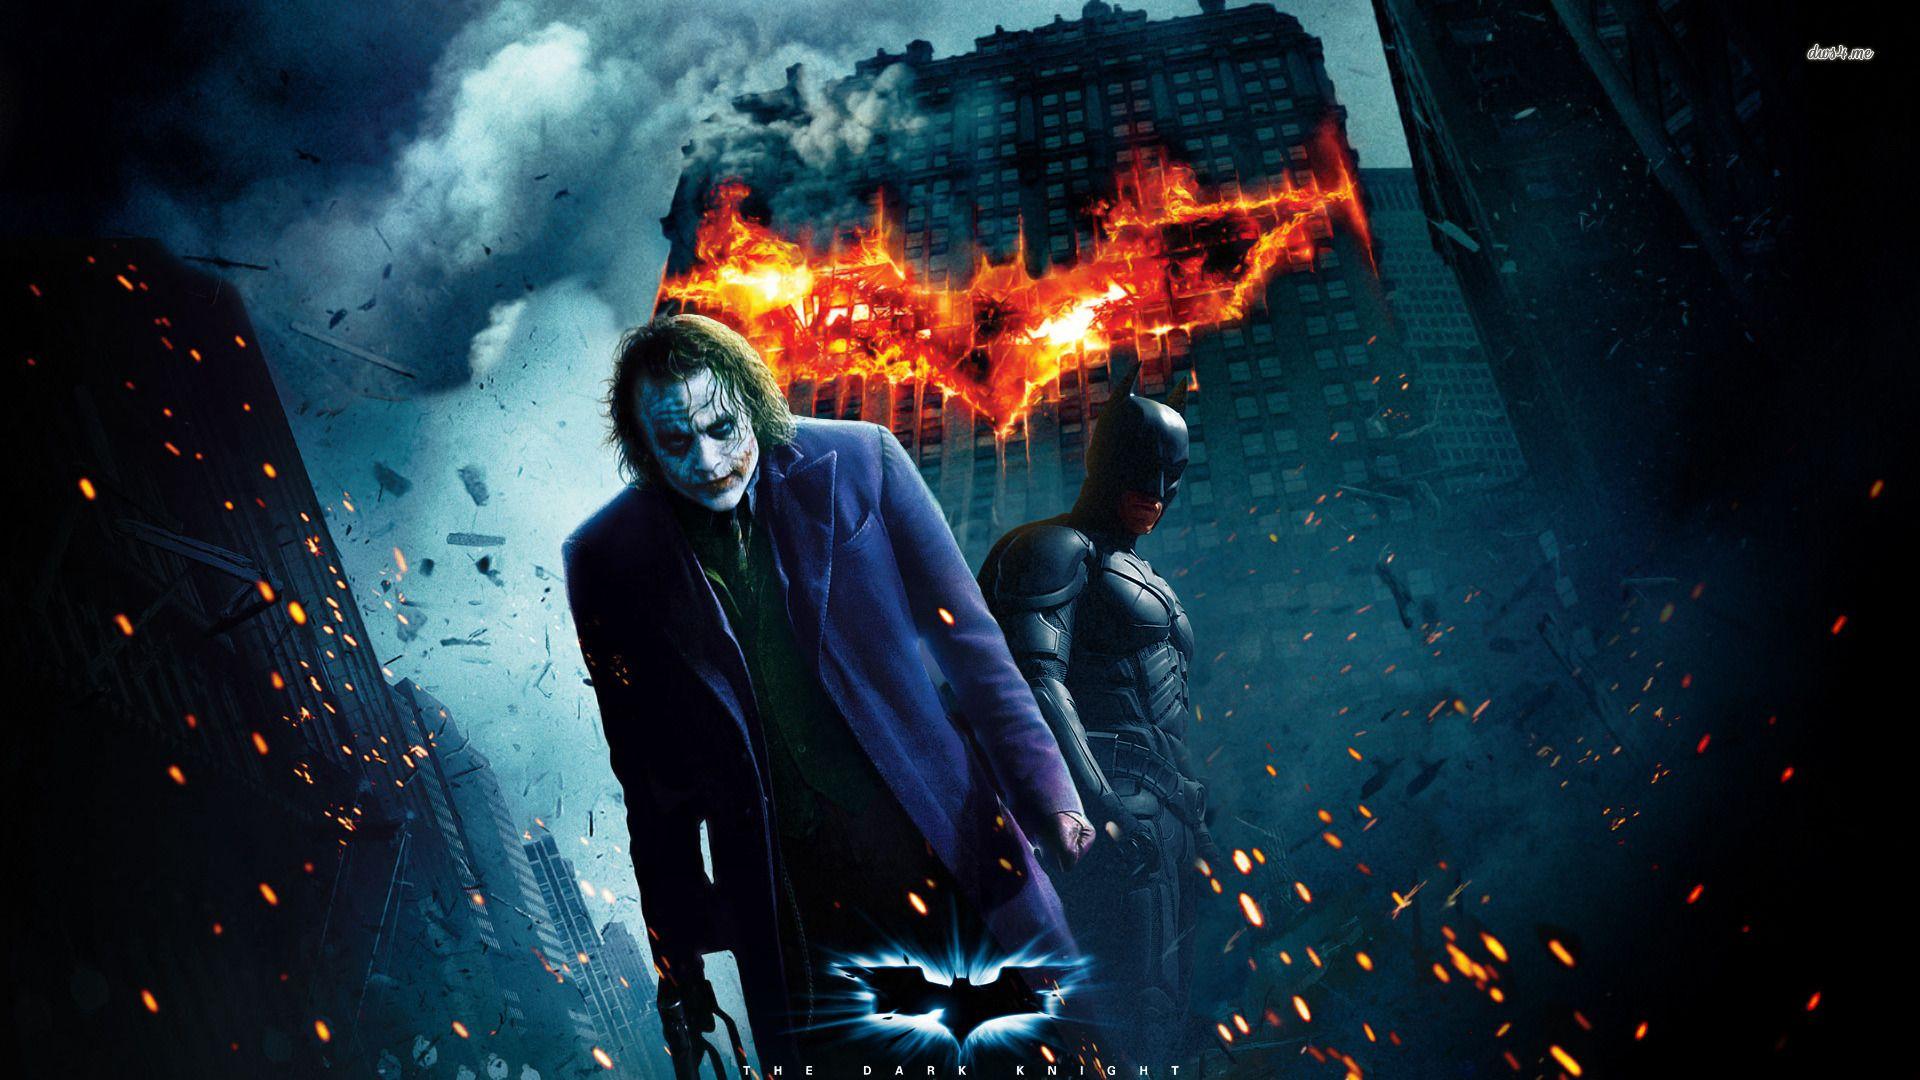 Download Free 85 Joker Wallpaper (The Dark Knight). The Quotes Land